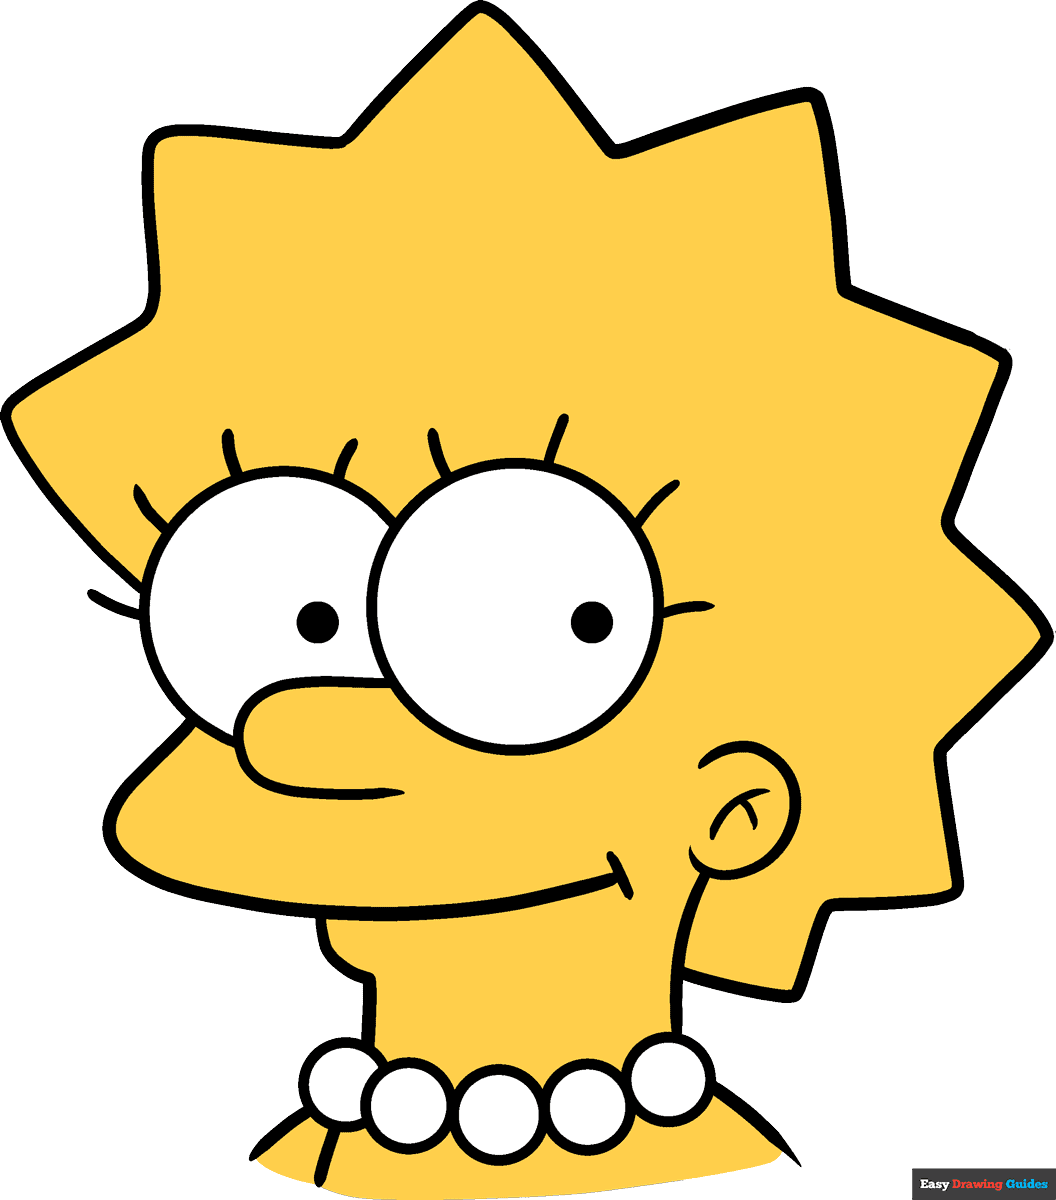 How to draw an easy lisa simpson drawing